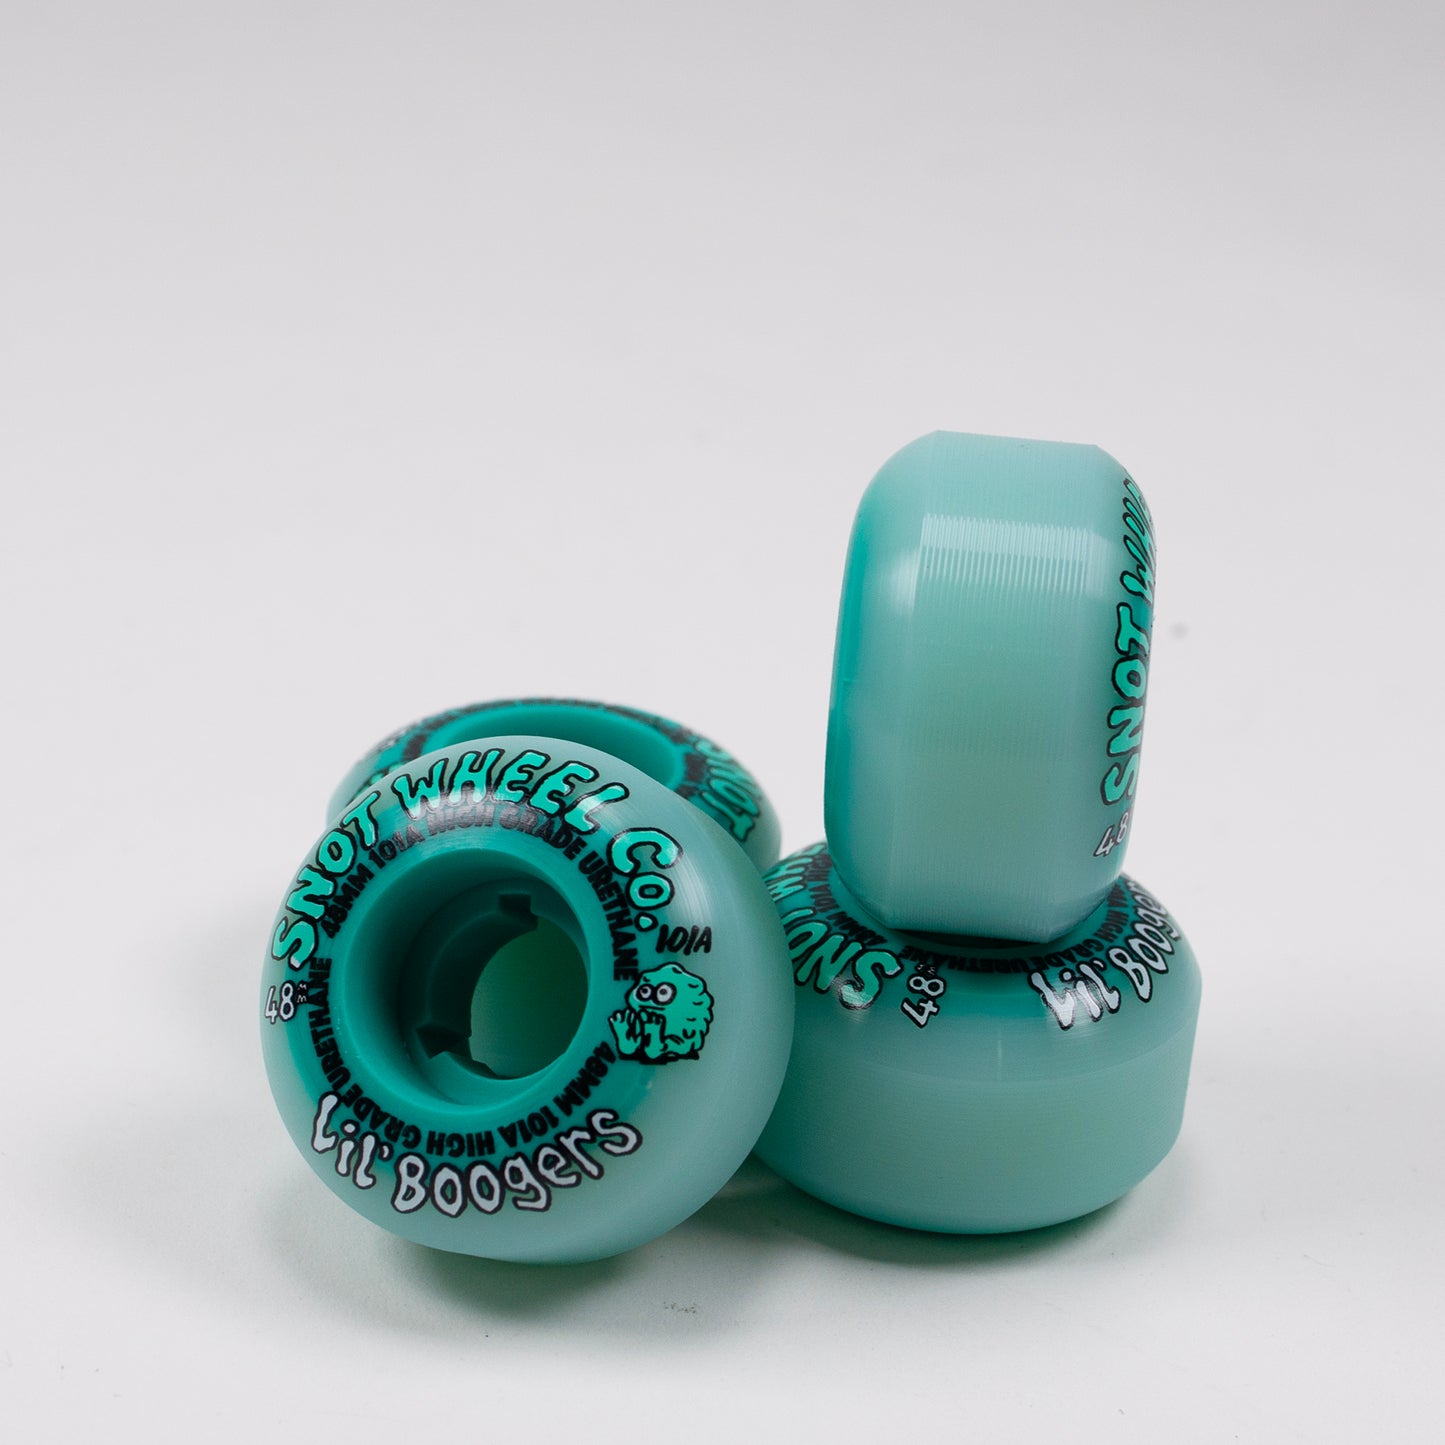 Snot - 48mm - 101a Lil Boogers Wheels - Teal - Prime Delux Store